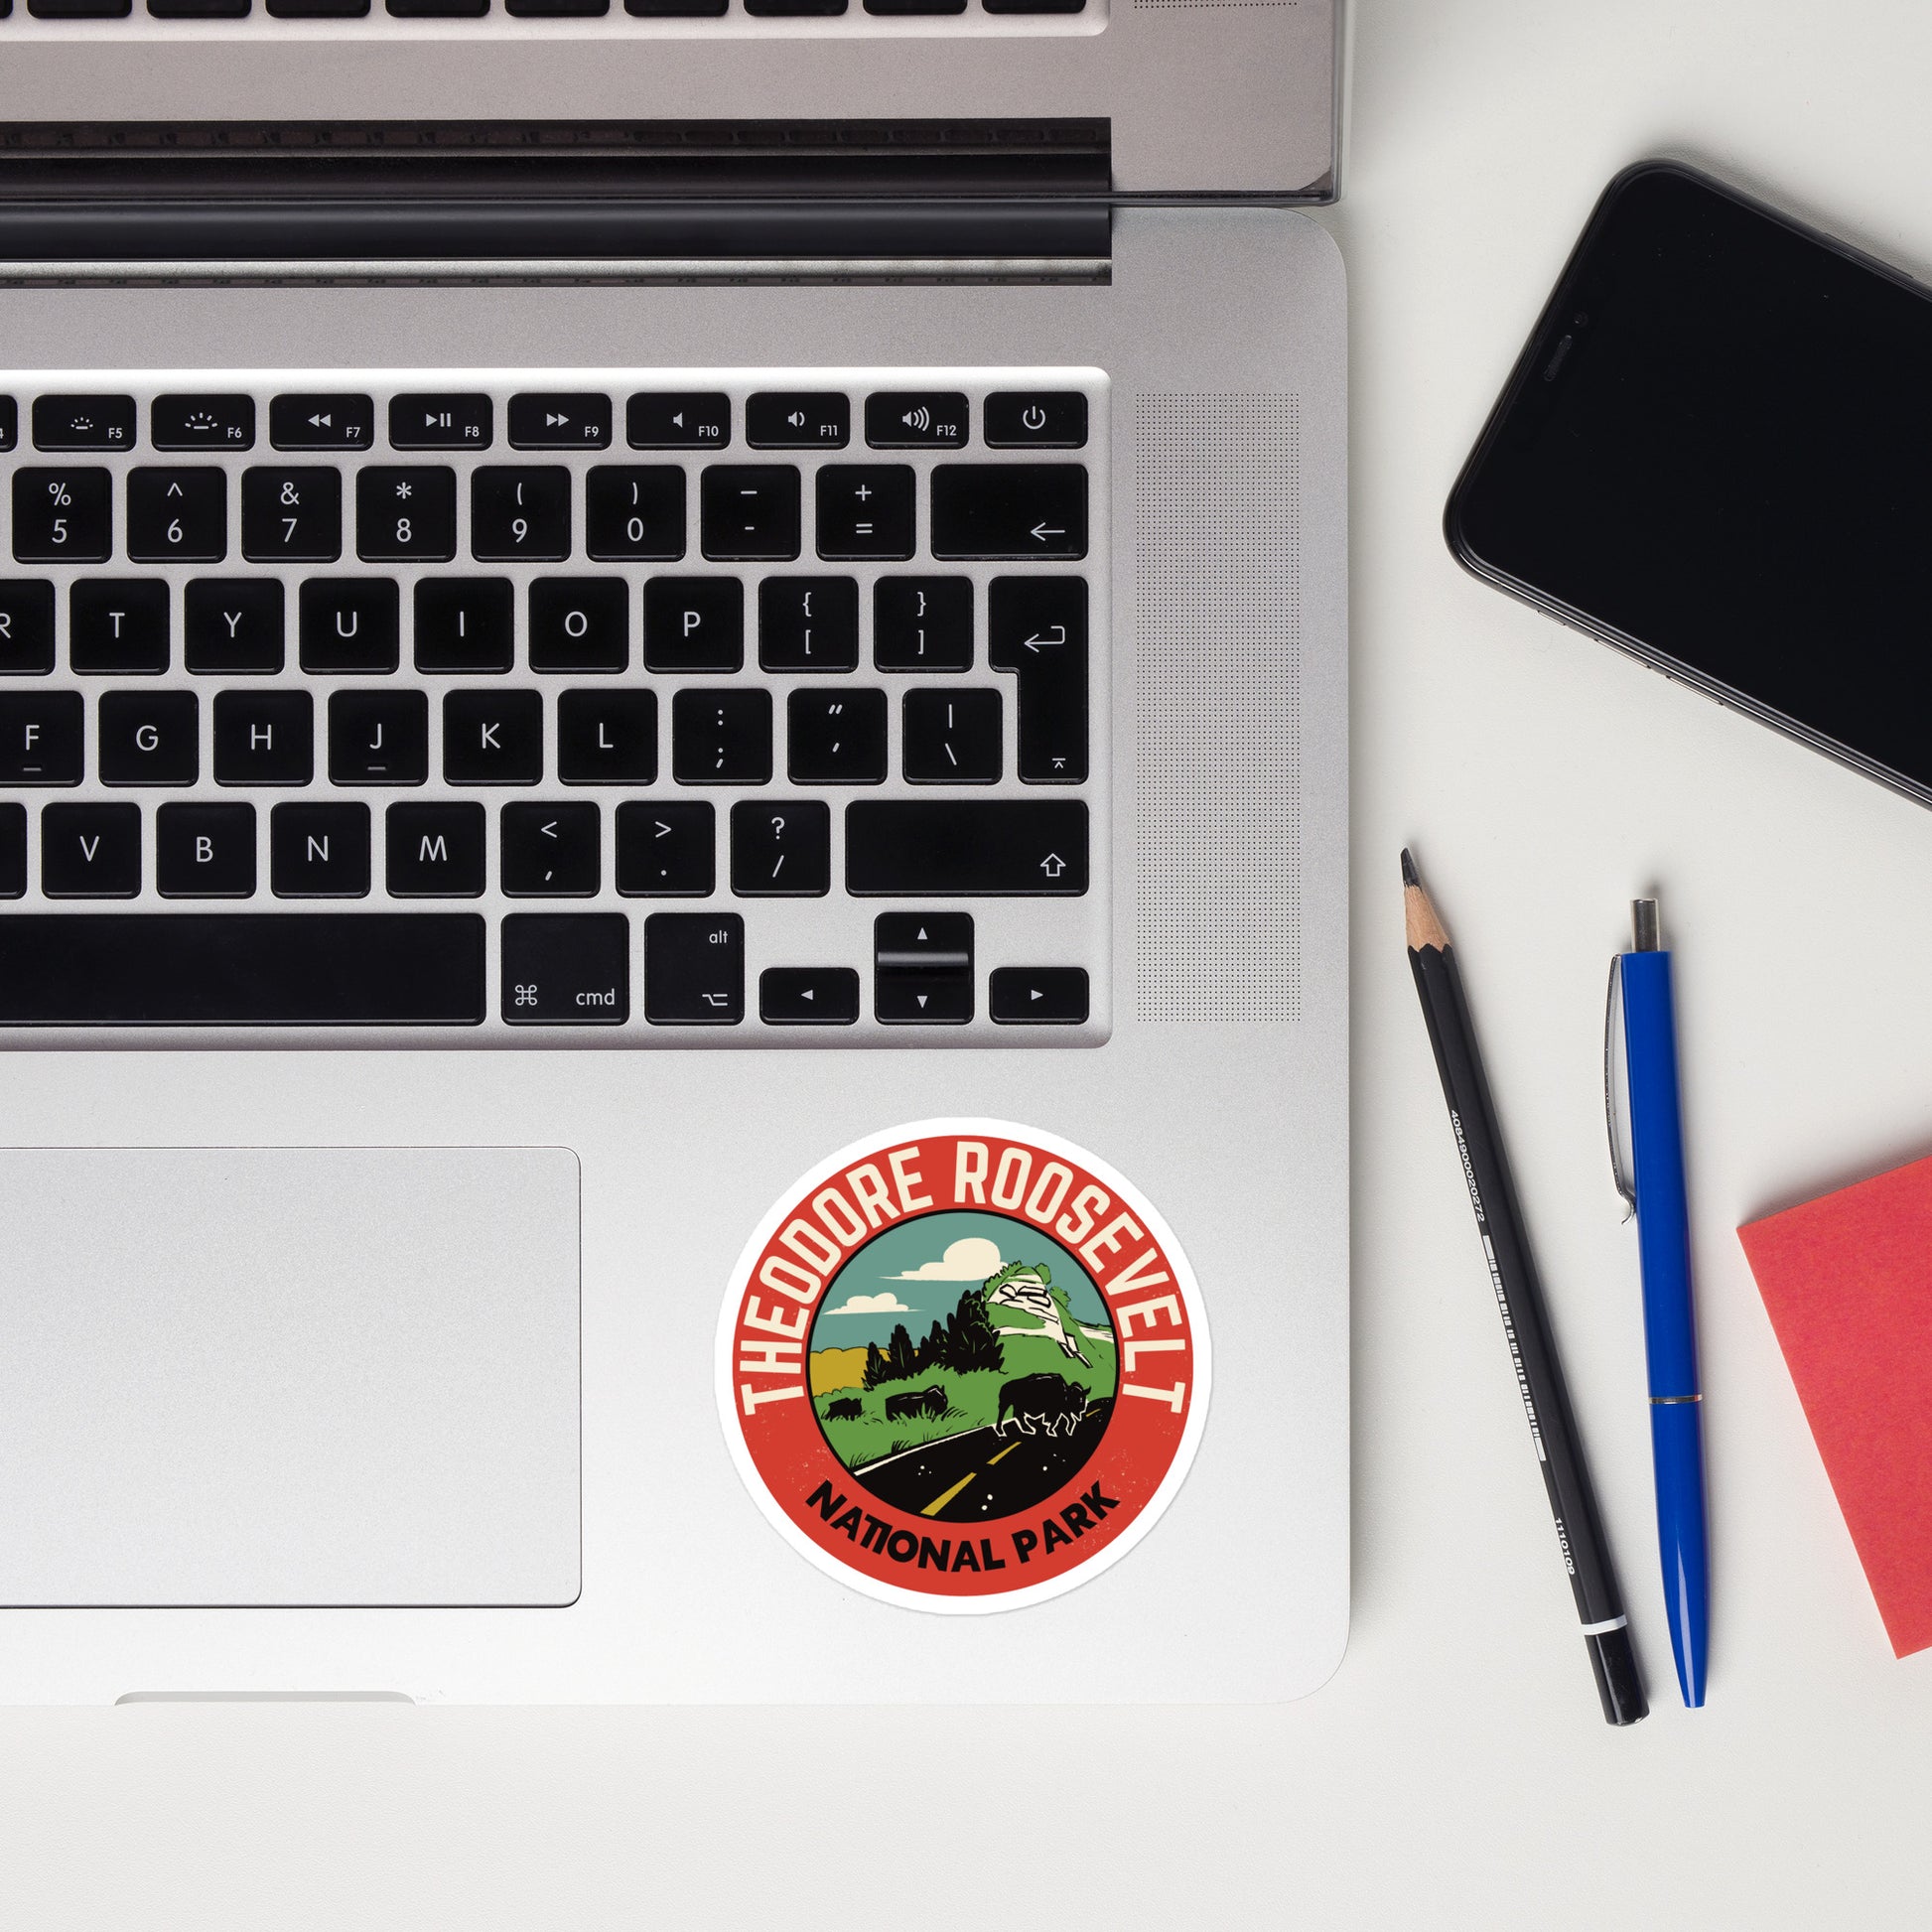 A sticker of Theodore Roosevelt National Park on a laptop